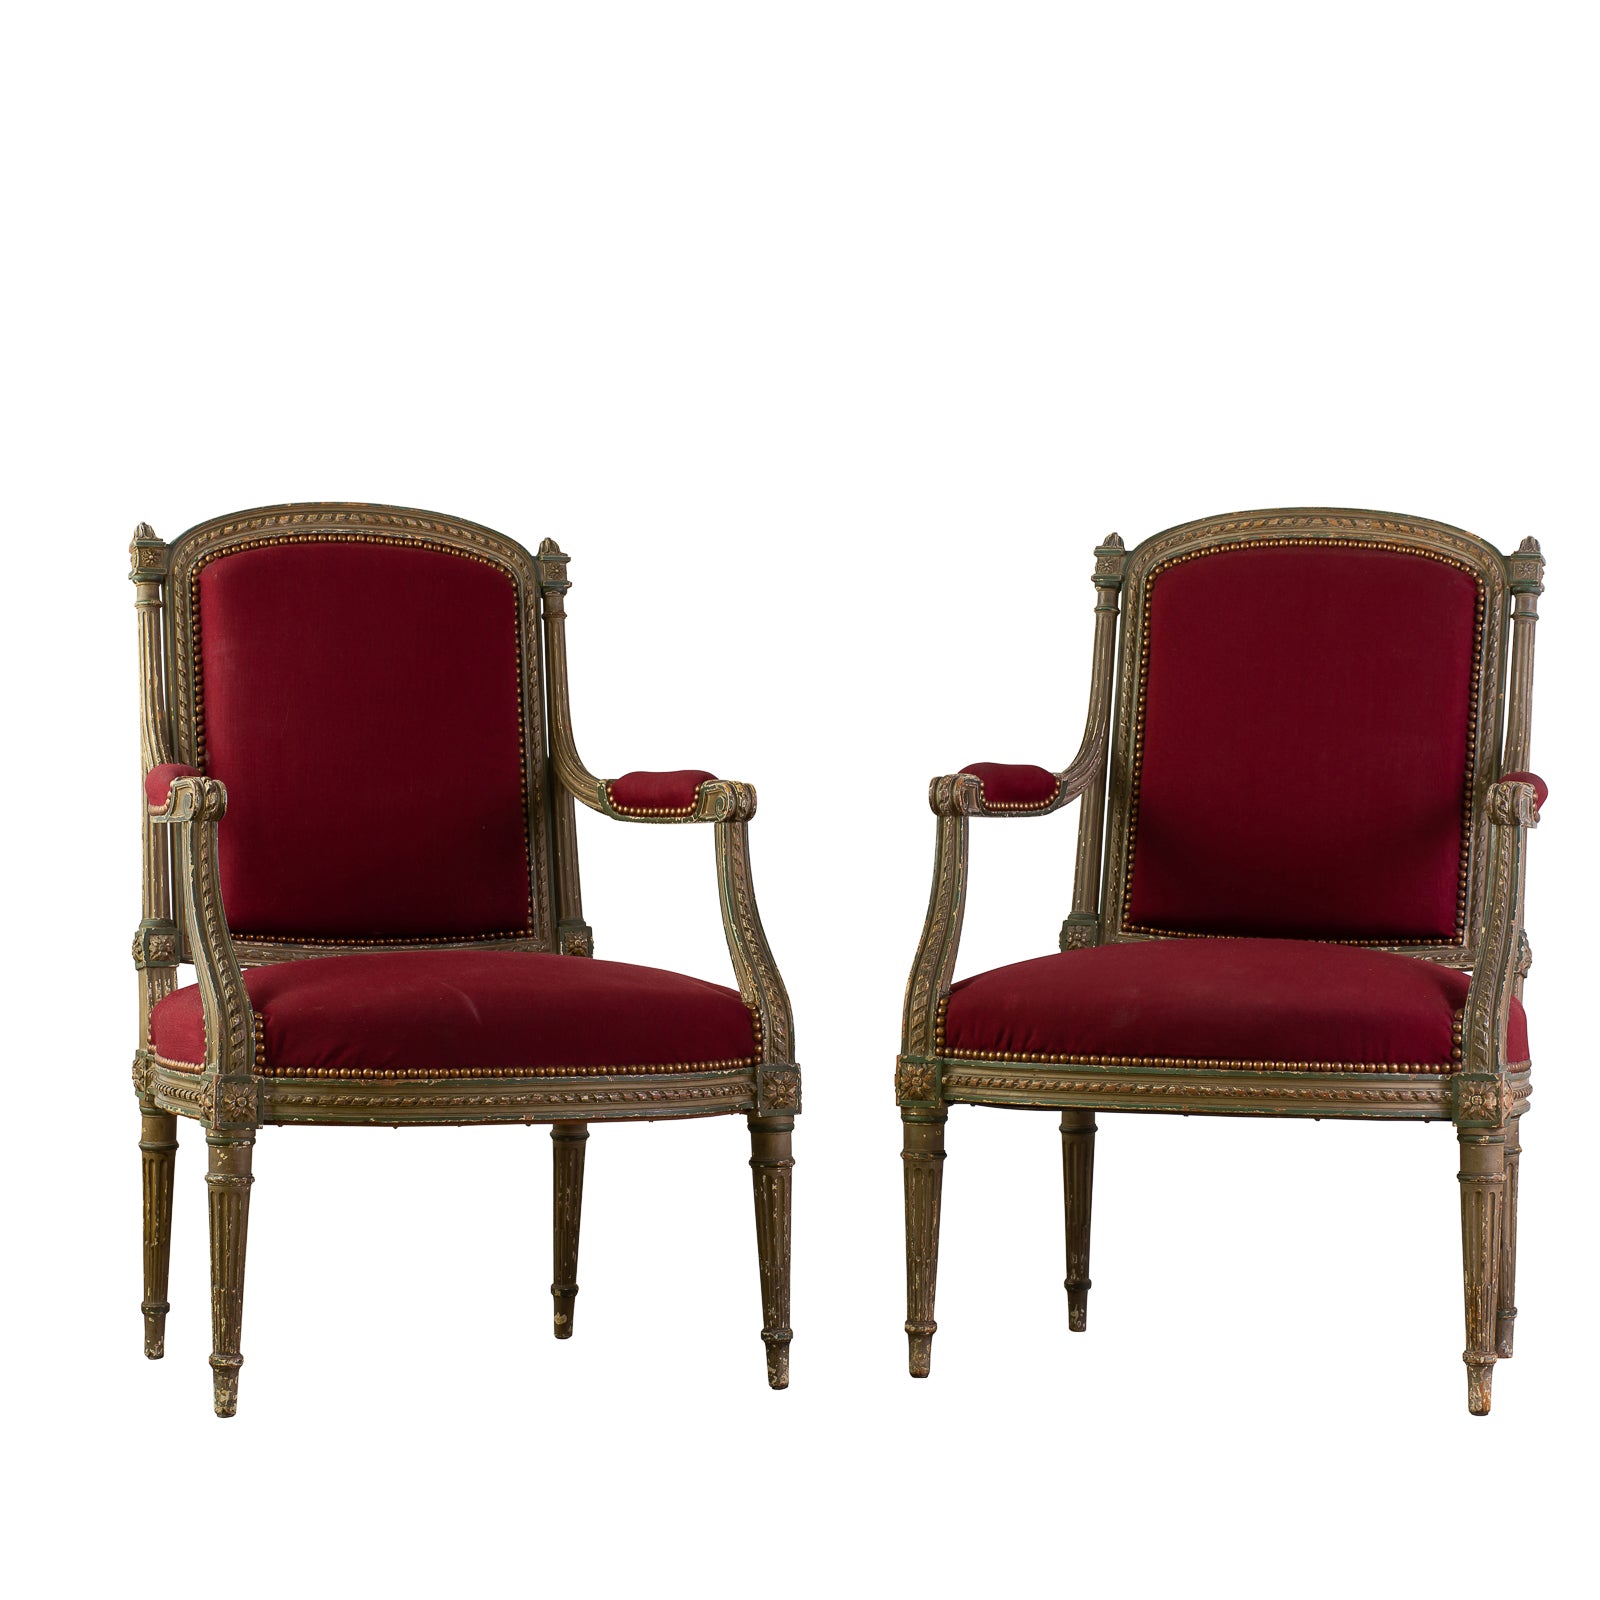 Pair of Antique Painted Louis XVI Style Armchairs